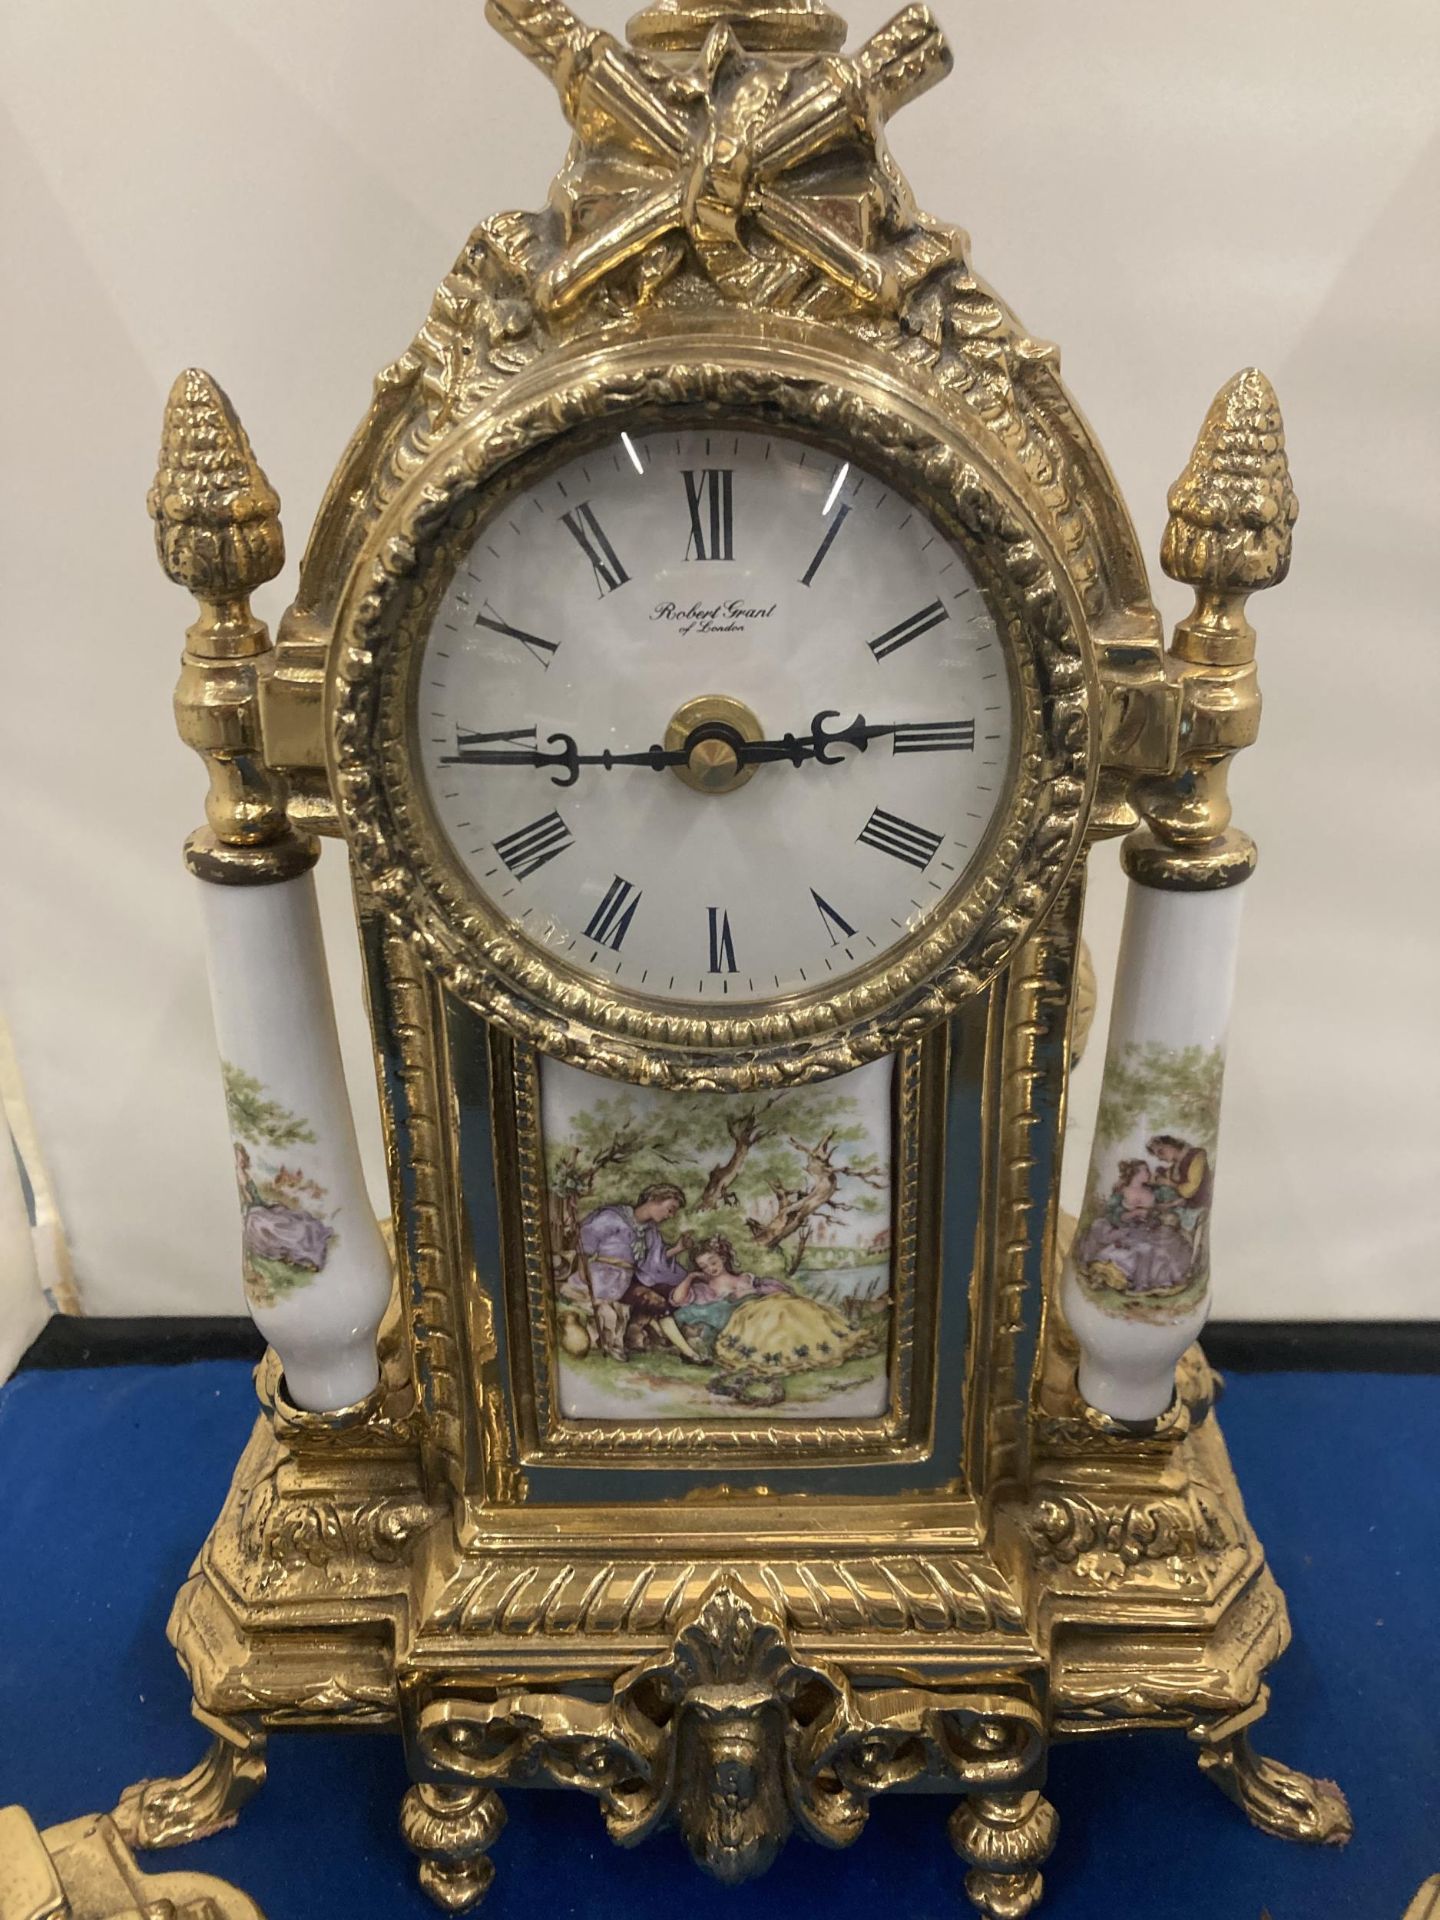 AN ROBERT GRANT OF LONDON ORNATE BRASS CLOCK WITH CERAMIC PILLARS AND INSERT OF A COURTING COUPLE - Image 3 of 4